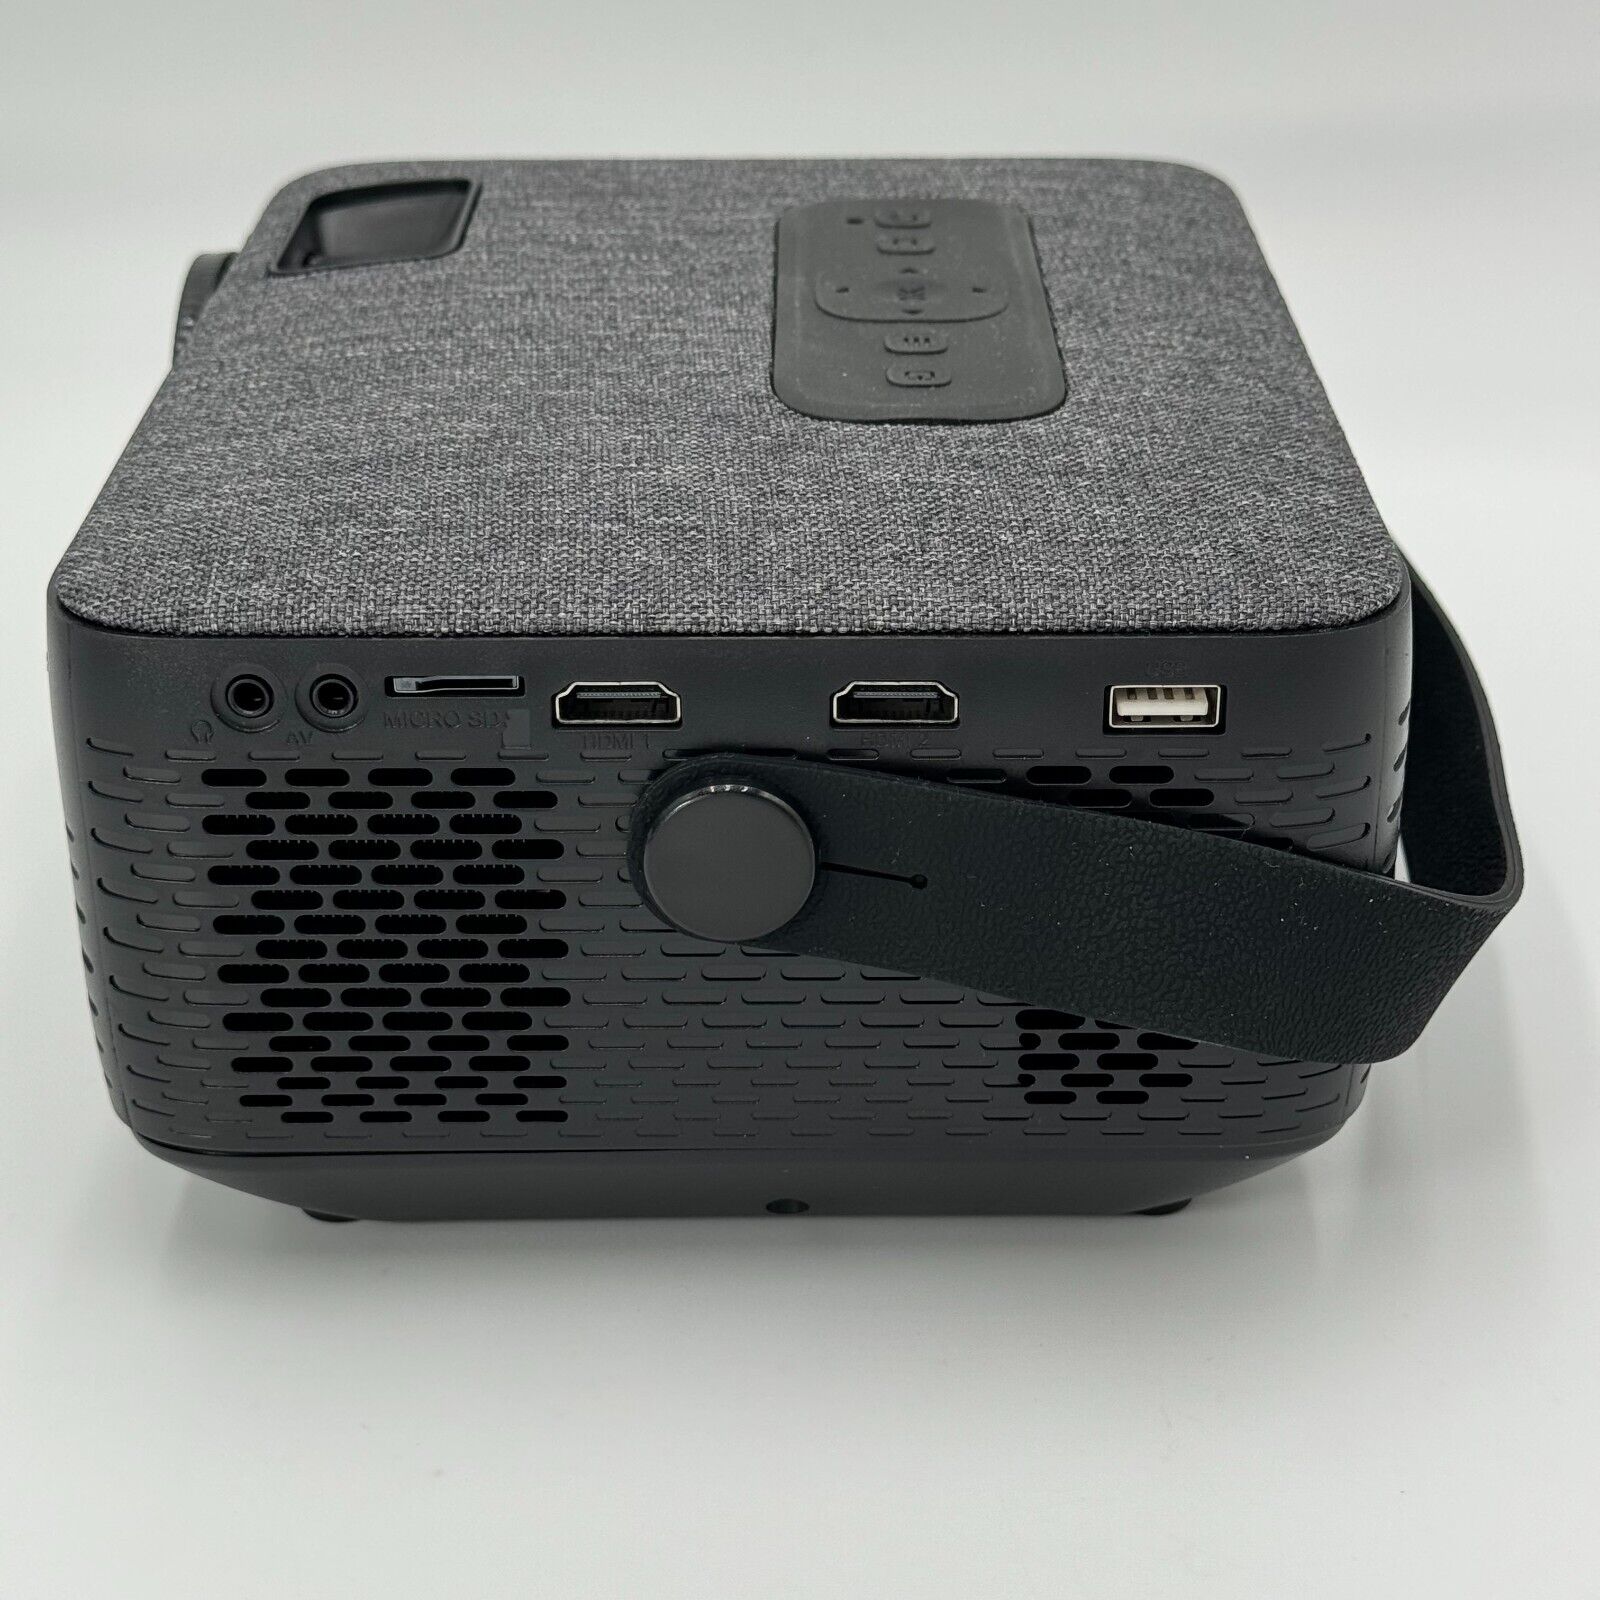 GPX Rechargeable Projector with BT, HDMI, USB and Micro SD Media Ports (PJ770B)